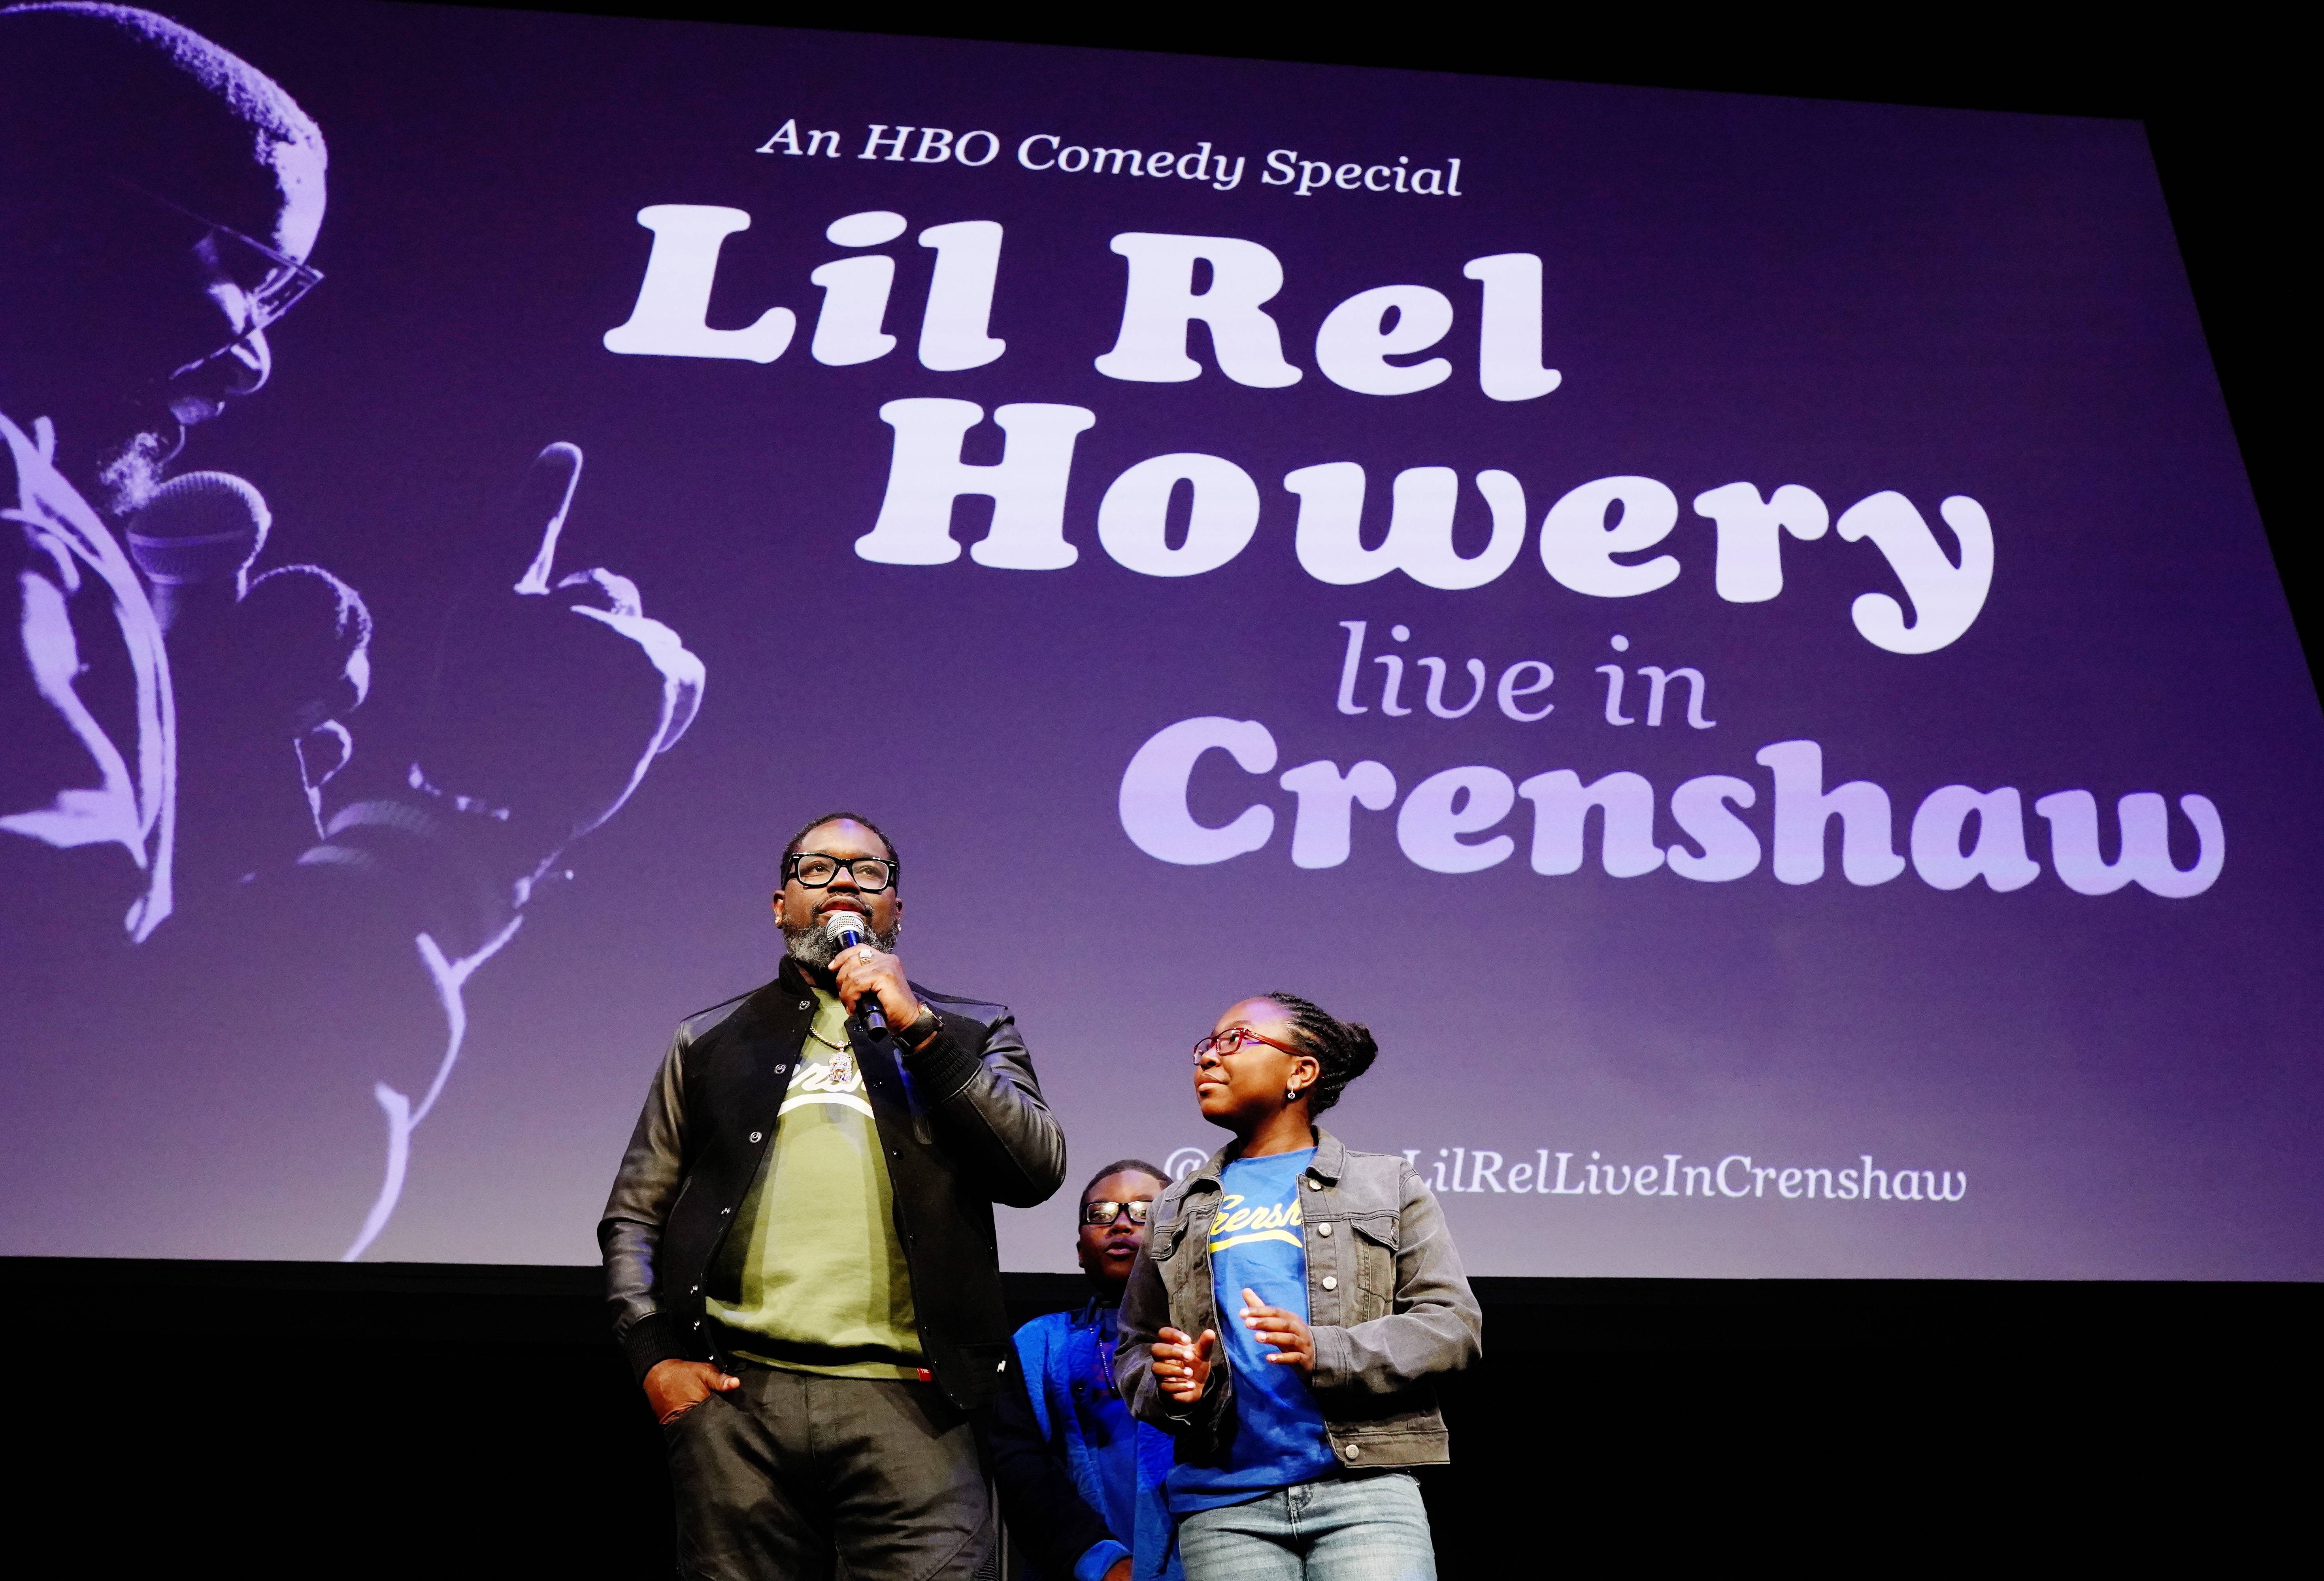 Lil Rel Howery and family speak onstage during HBO's Lil Rel Comedy Special Screening, Panel and Reception at NeueHouse Hollywood on November 21, 2019 in Los Angeles, California